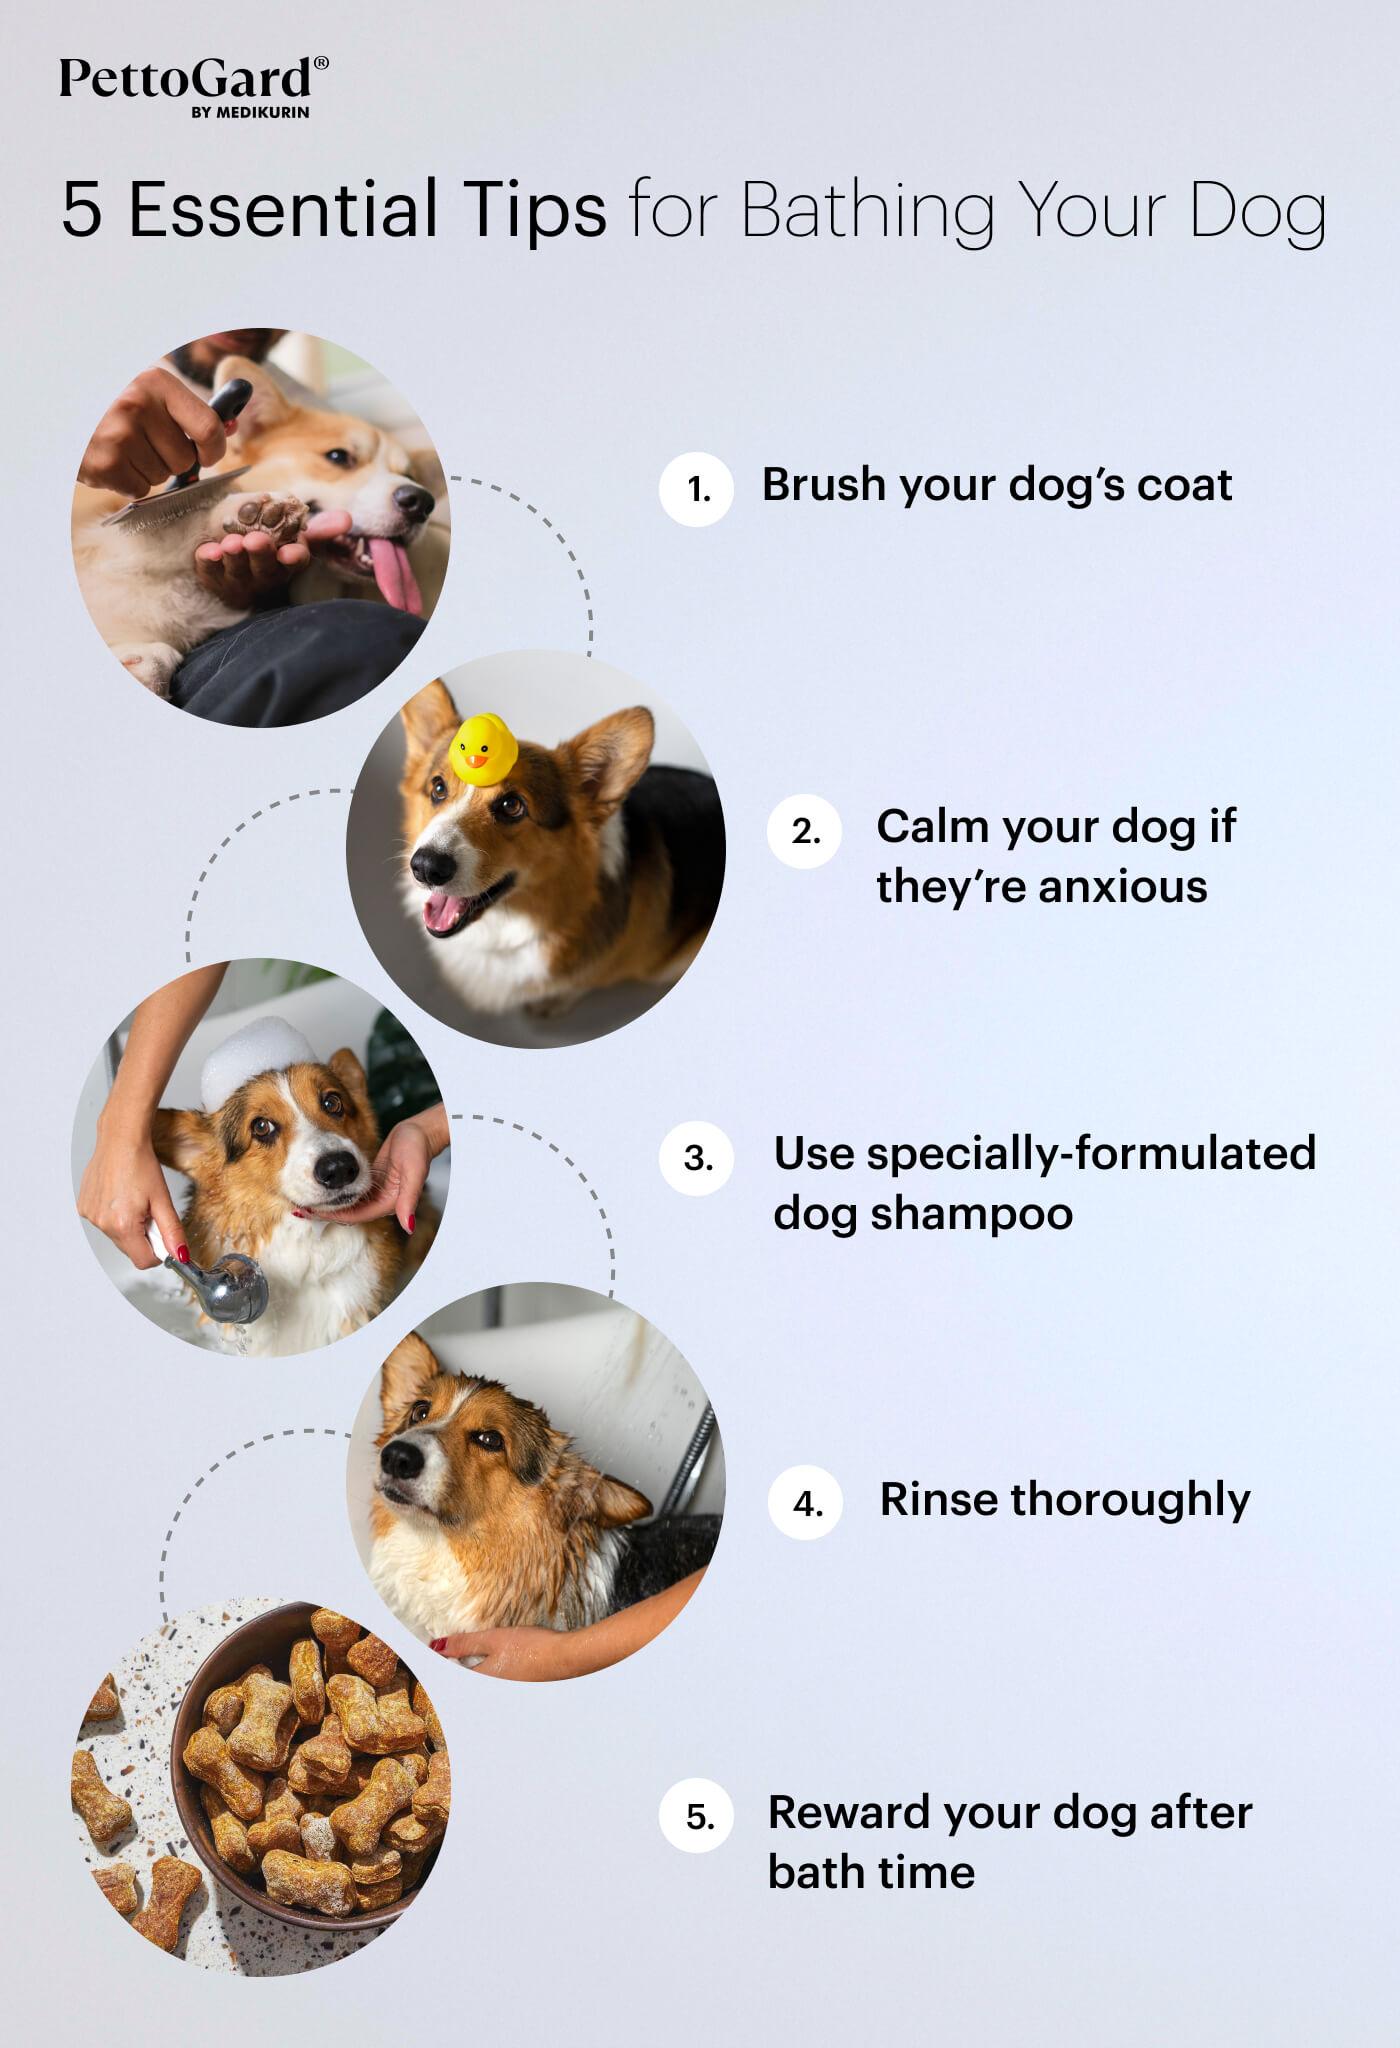 PettoGard 5 Essential Tips for Bathing Your Dog